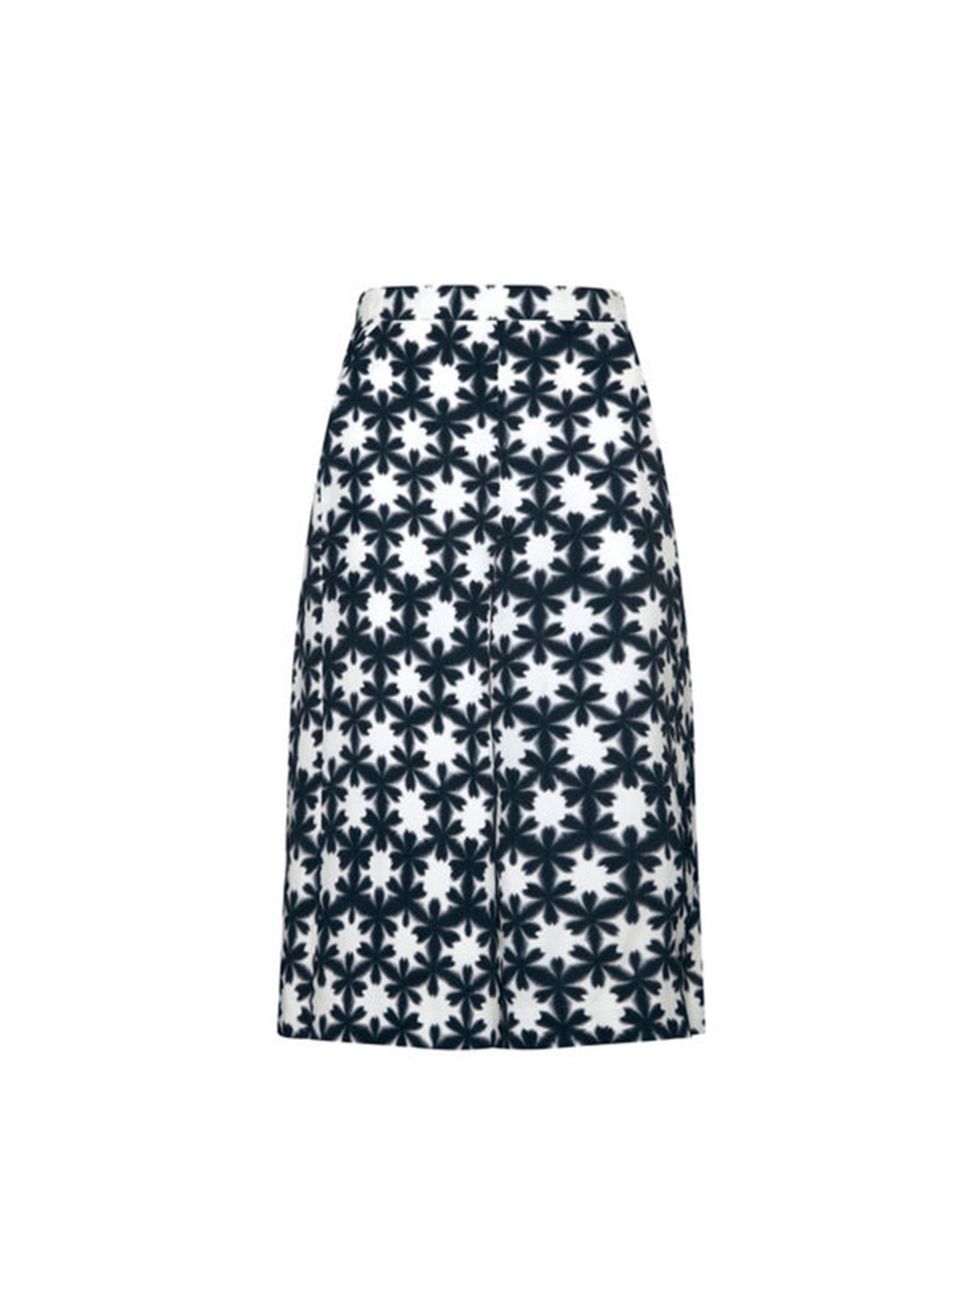 <p>Boyish cut and girlie prints for Senior Fashion Editor Michelle Duguid. </p>

<p><a href="http://www.whistles.com/women/clothing/trousers/sekka-floral-culottes-19618.html?dwvar_sekka-floral-culottes-19618_color=Black%20and%20White#start=1" target="_bla